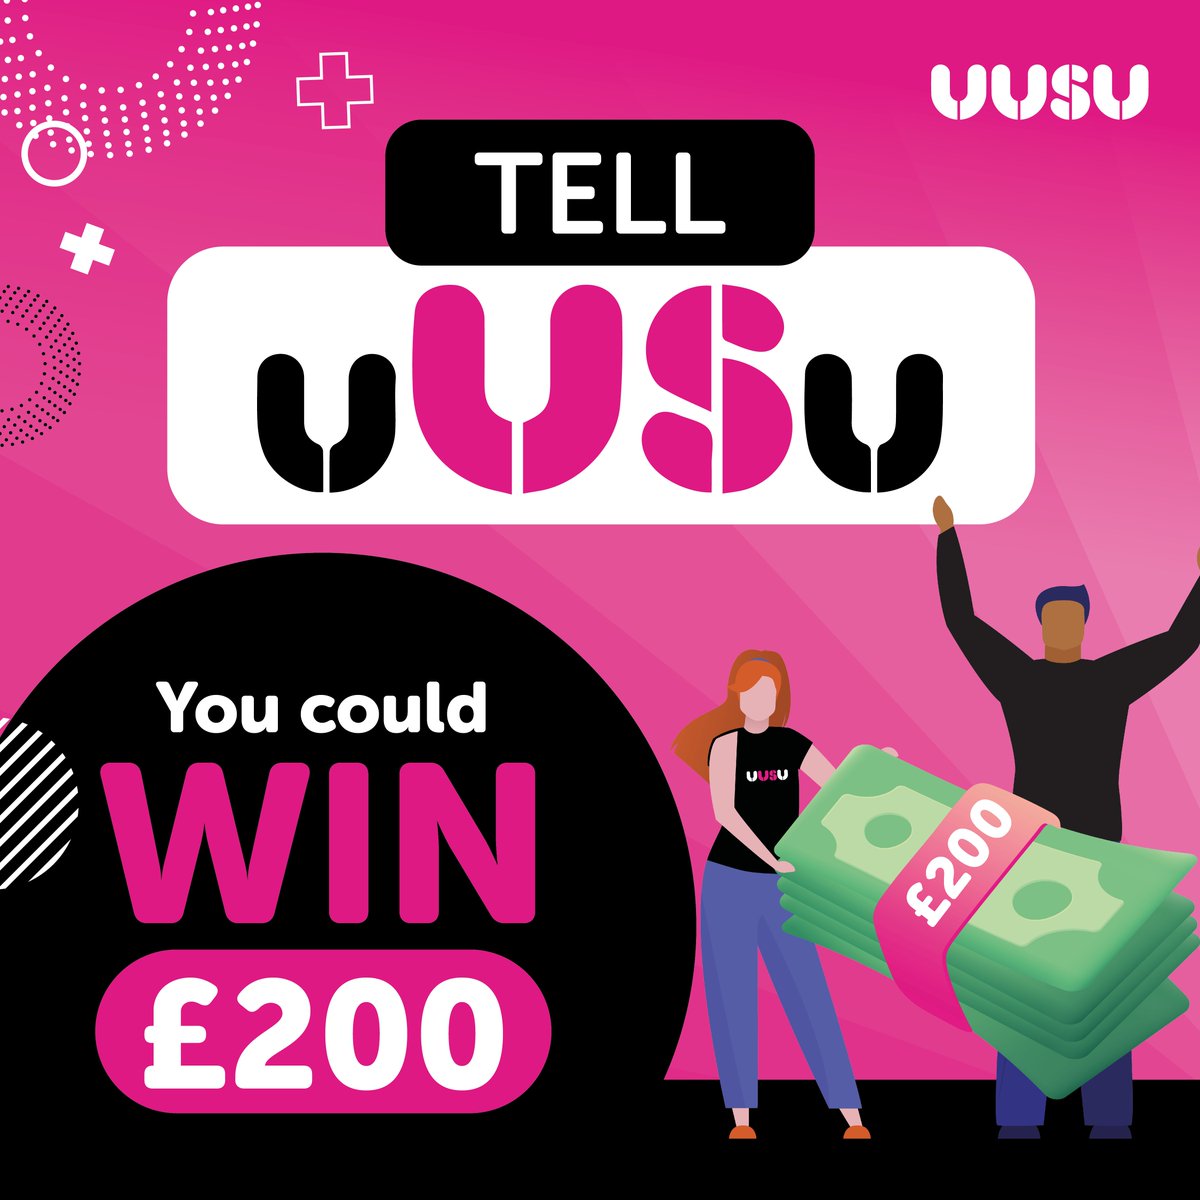 Tell uUSu We want our members to be at the heart of our work, to do this, we need you tell us what you think our priorities should be. Have your voice heard in our survey and as a thank you, you will be entered into a £200 PRIZE DRAW! HAVE YOUR SAY surveymonkey.com/r/FM22DXM